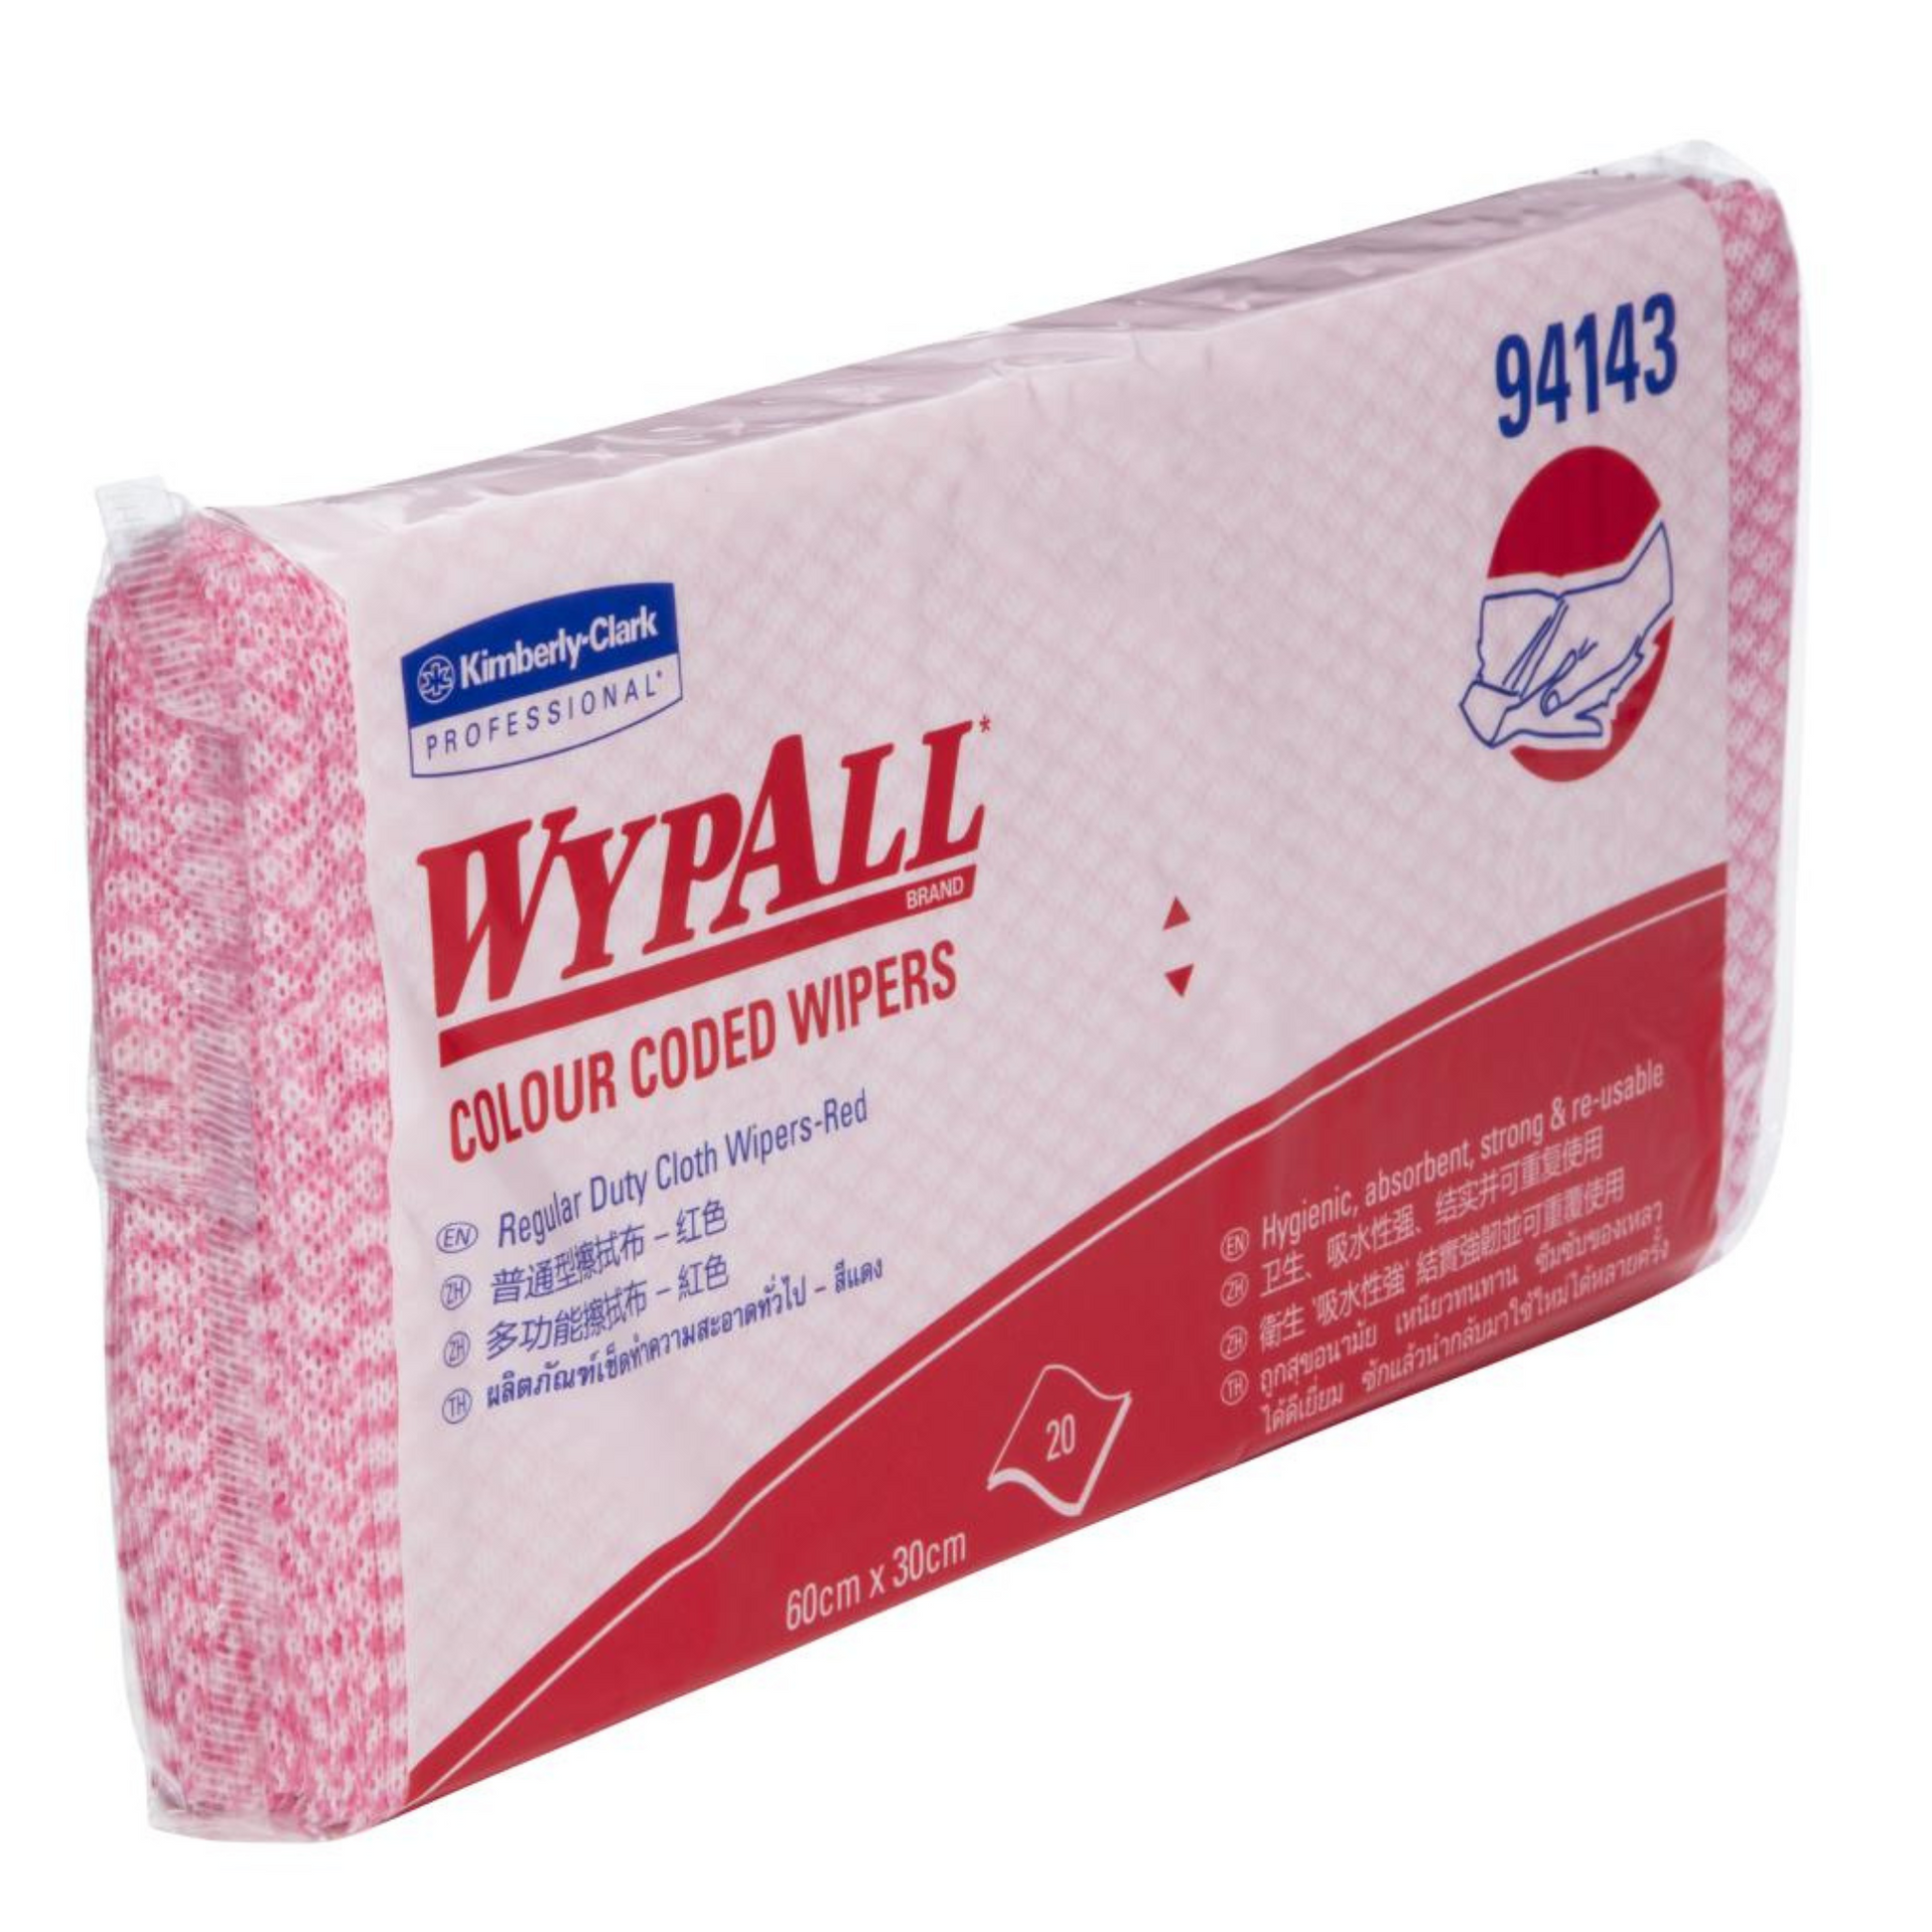 Wypall 94143 Extra Wipers 60cmx30cm Red - 1 Pack (20 Wipers)